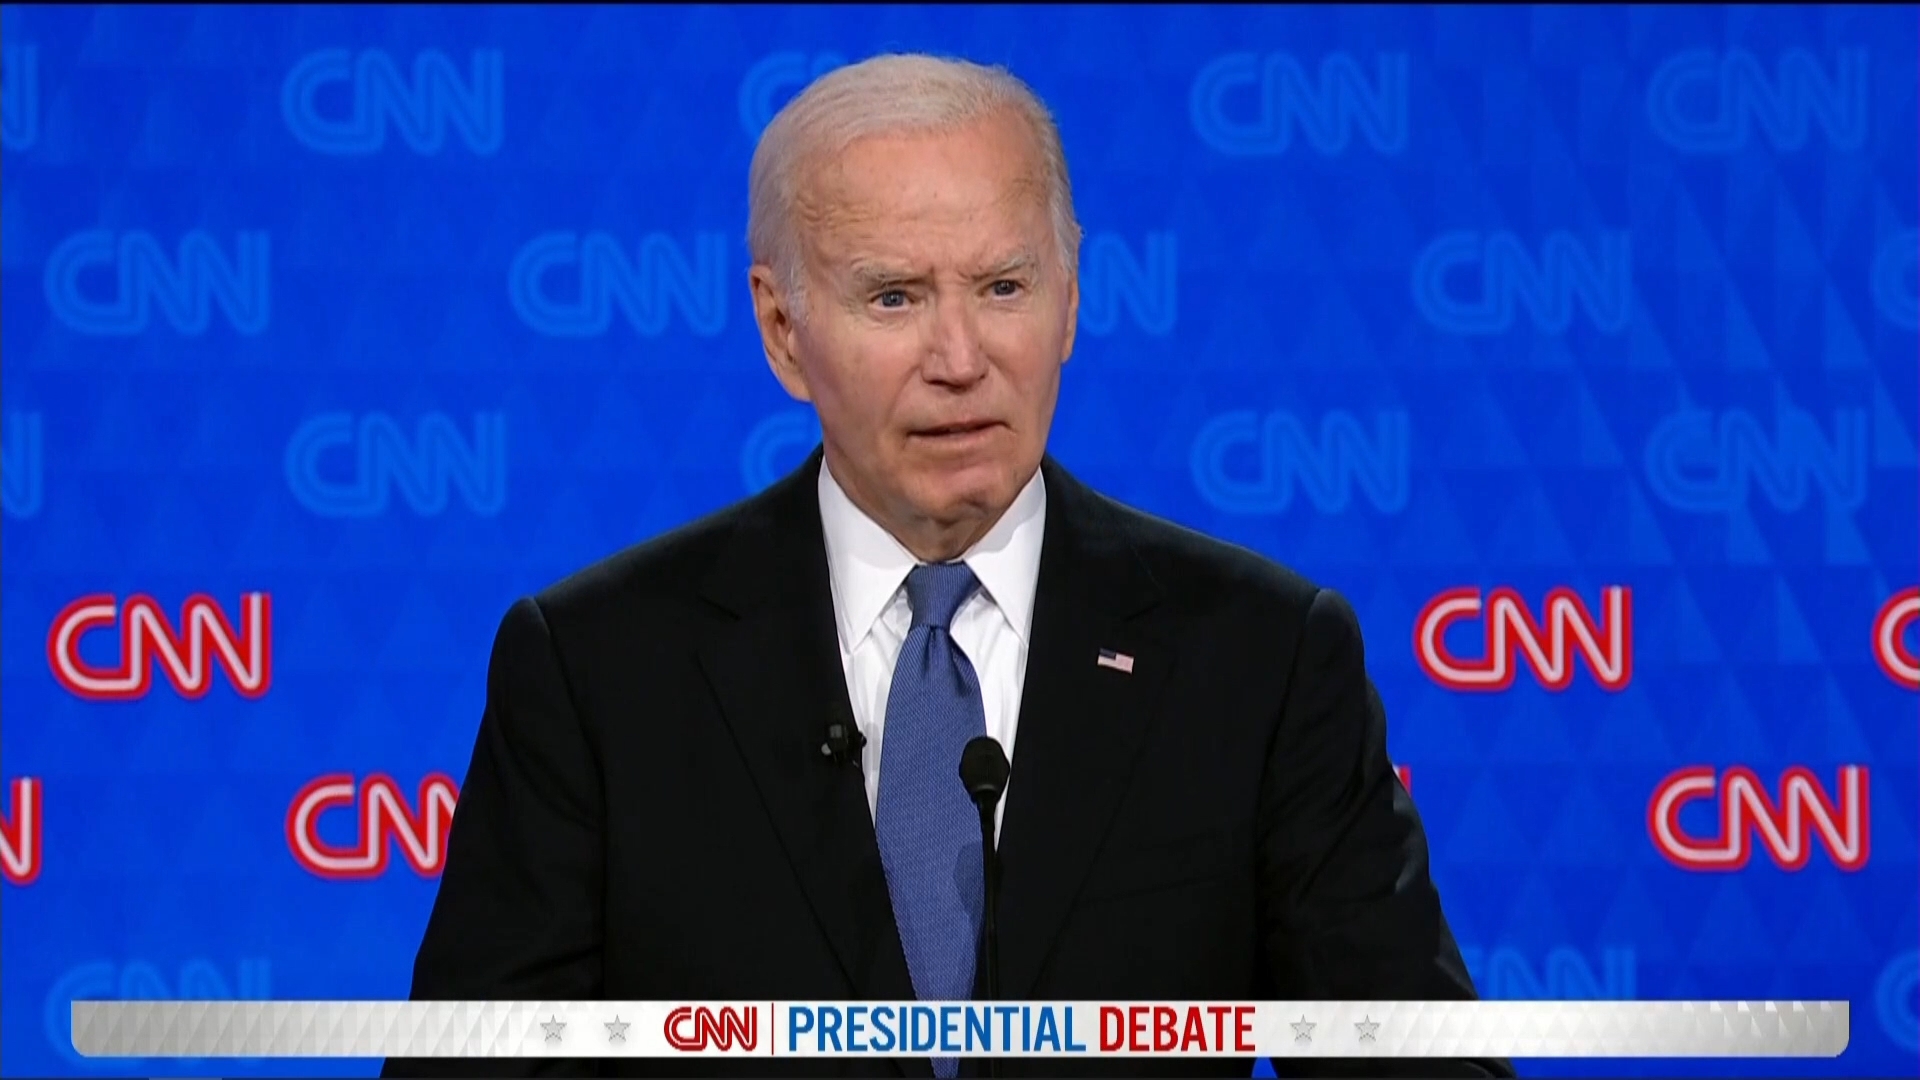 WFAA answers the impact Biden dropping out of the race could have not only on the presidential election, but also local and state elections.